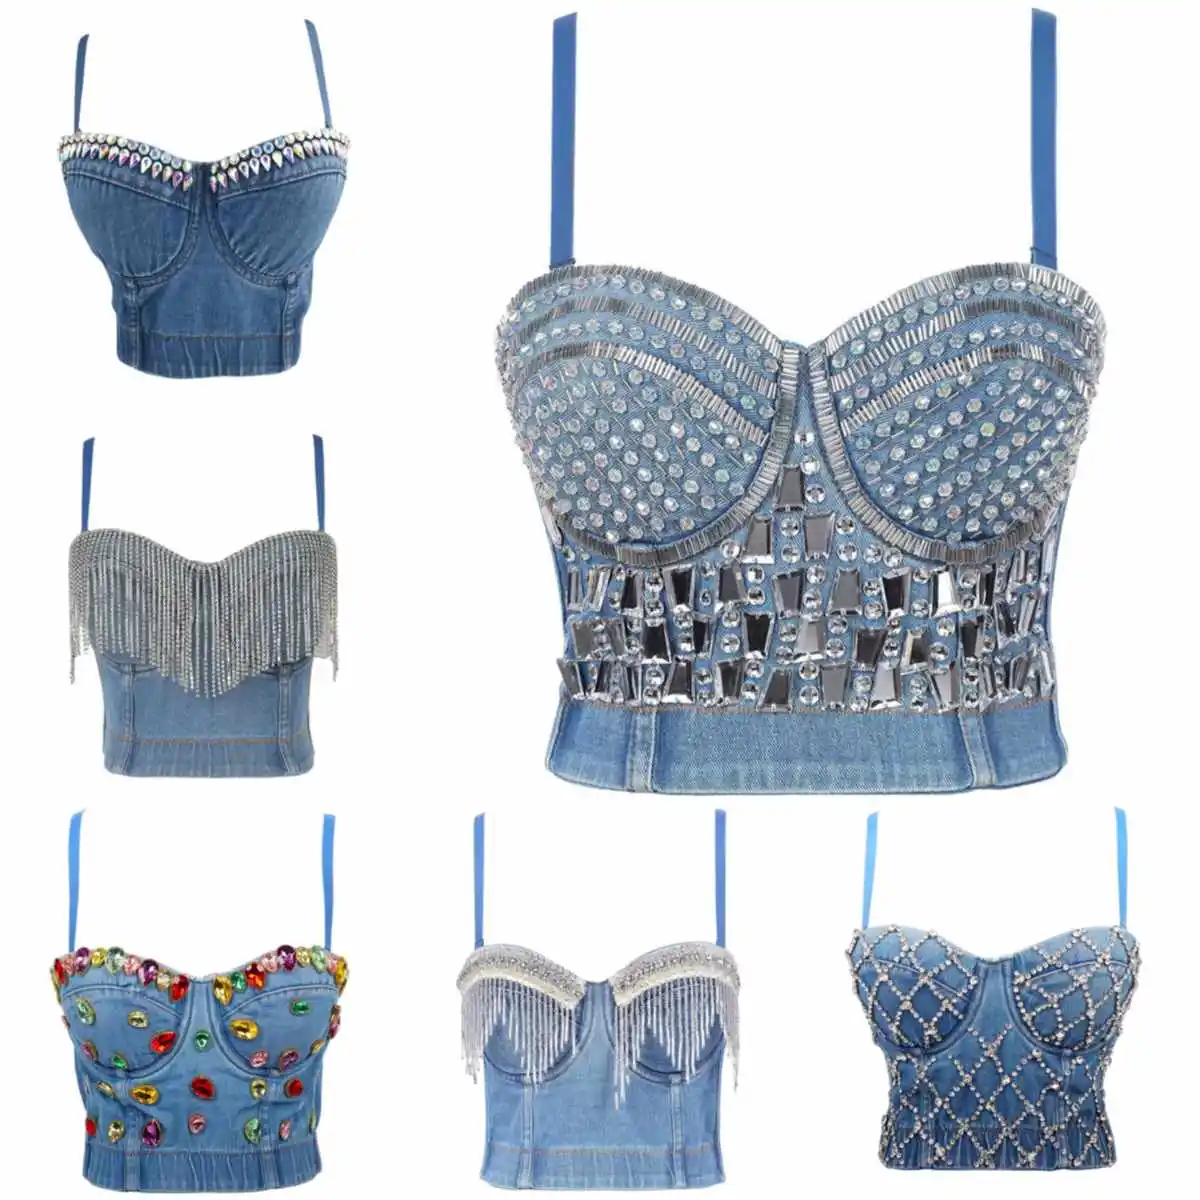 2022 Sexy Denim Rhinestone Corset Camisoles Bustiers Bra Party Club Streetwear Lingerie Look Stage costumes